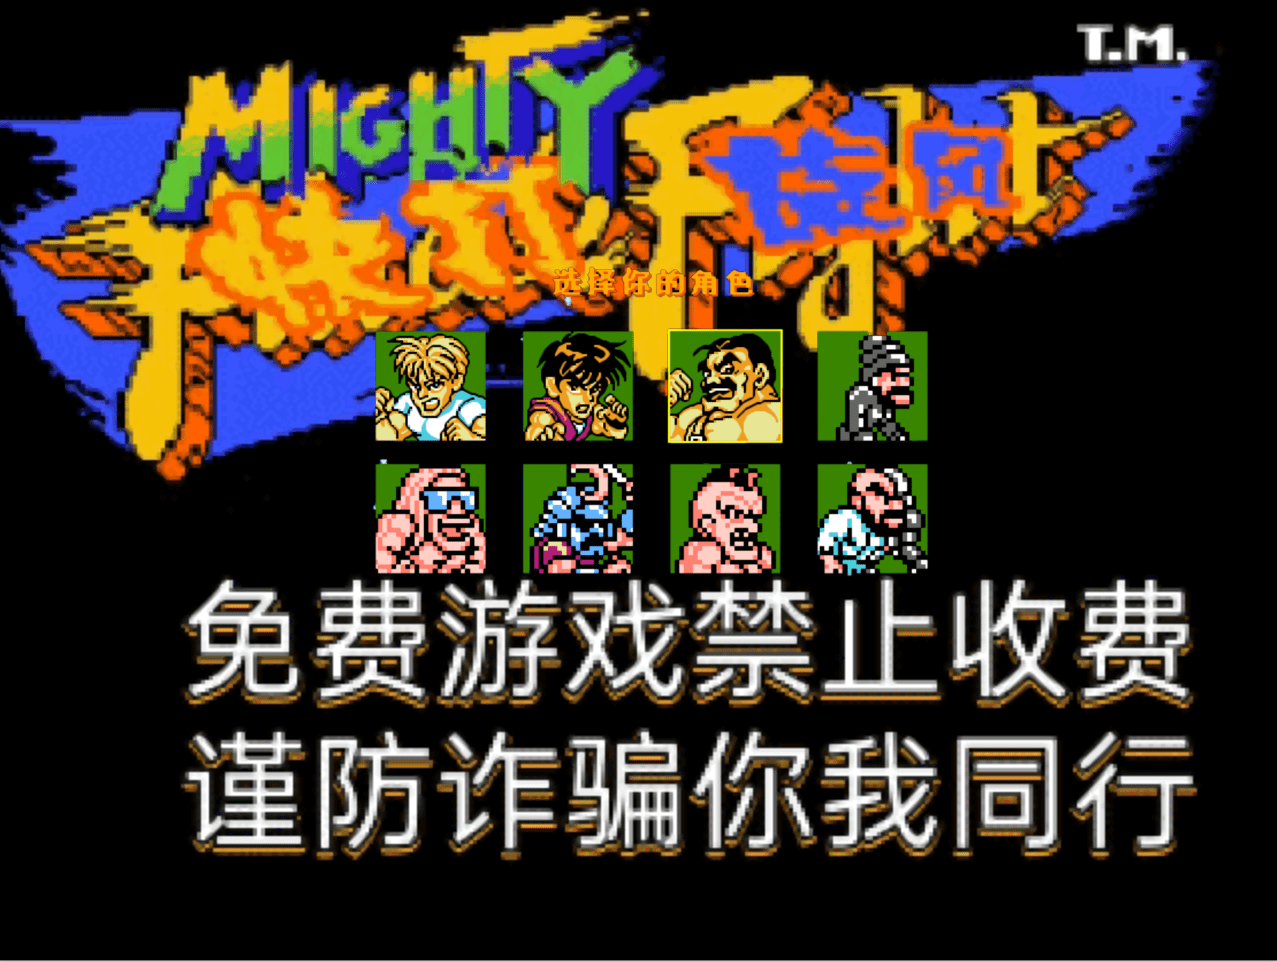 Mighty Final Fight X-OpenBoR